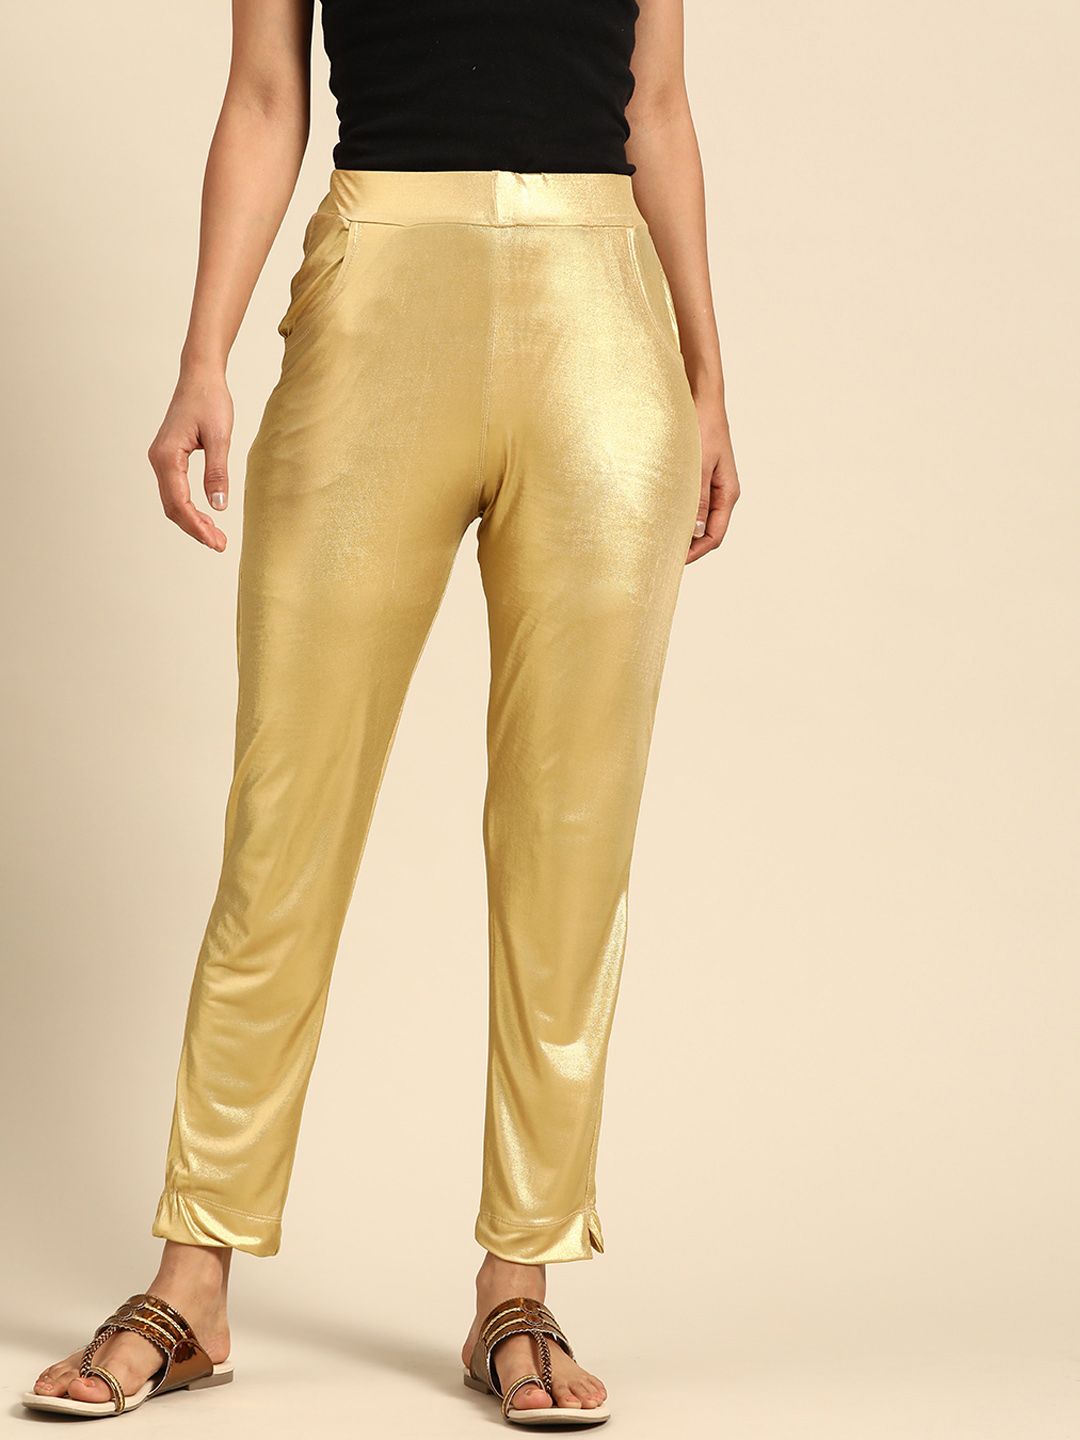 TAG 7 Women Golden Solid Ankle Length Sheen Leggings Price in India